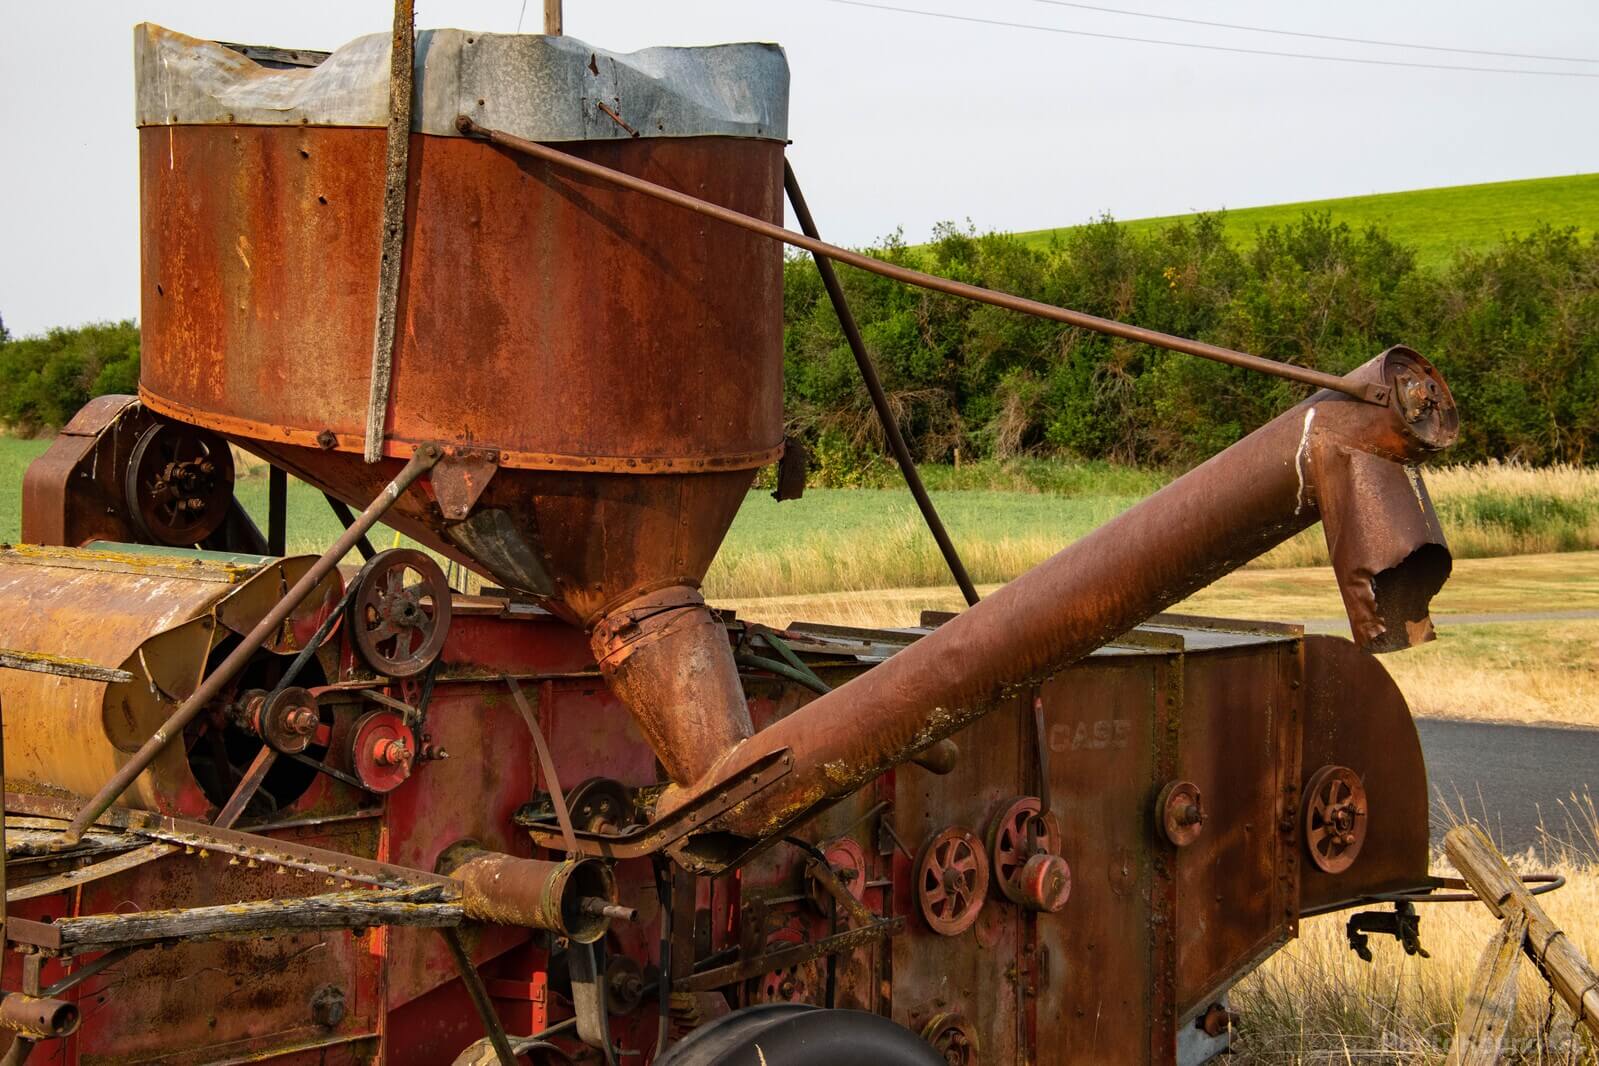 Image of Borgen Road Old Machinery by Nathan Baker